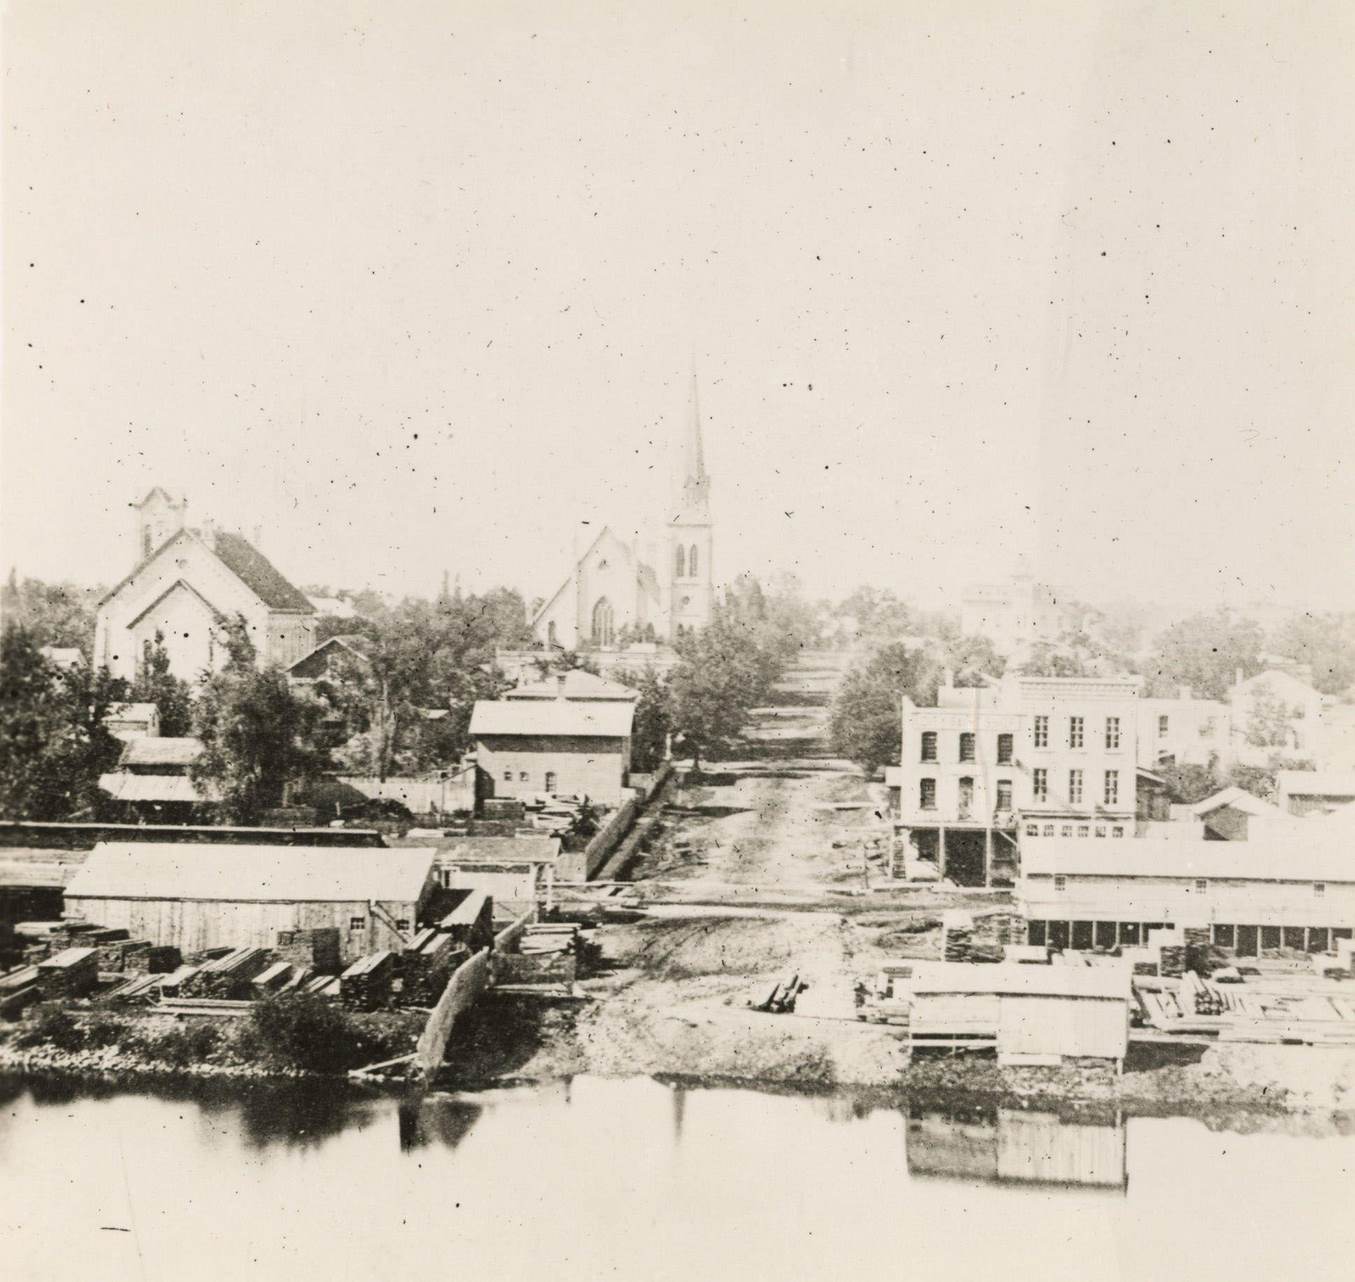 Elevated view over river of Dodge Street in Janesville looking west, Janesville, Wisconsin, 1870.